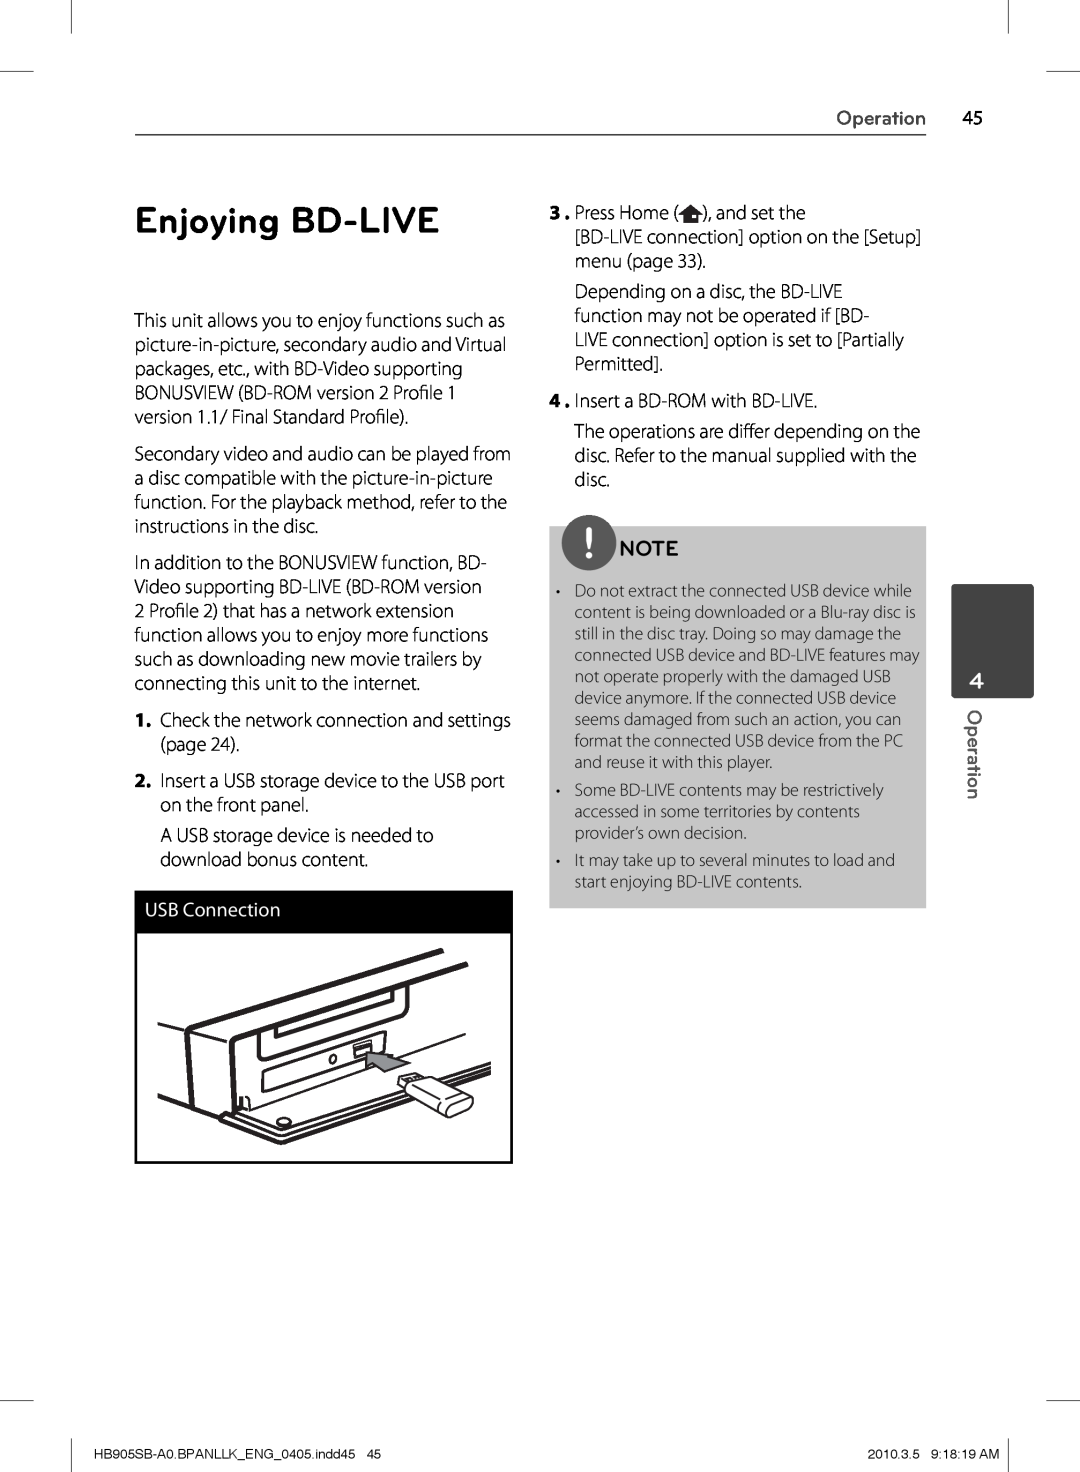 LG Electronics HB905SB Enjoying BD-LIVE, Operation, Check the network connection and settings page, USB Connection 